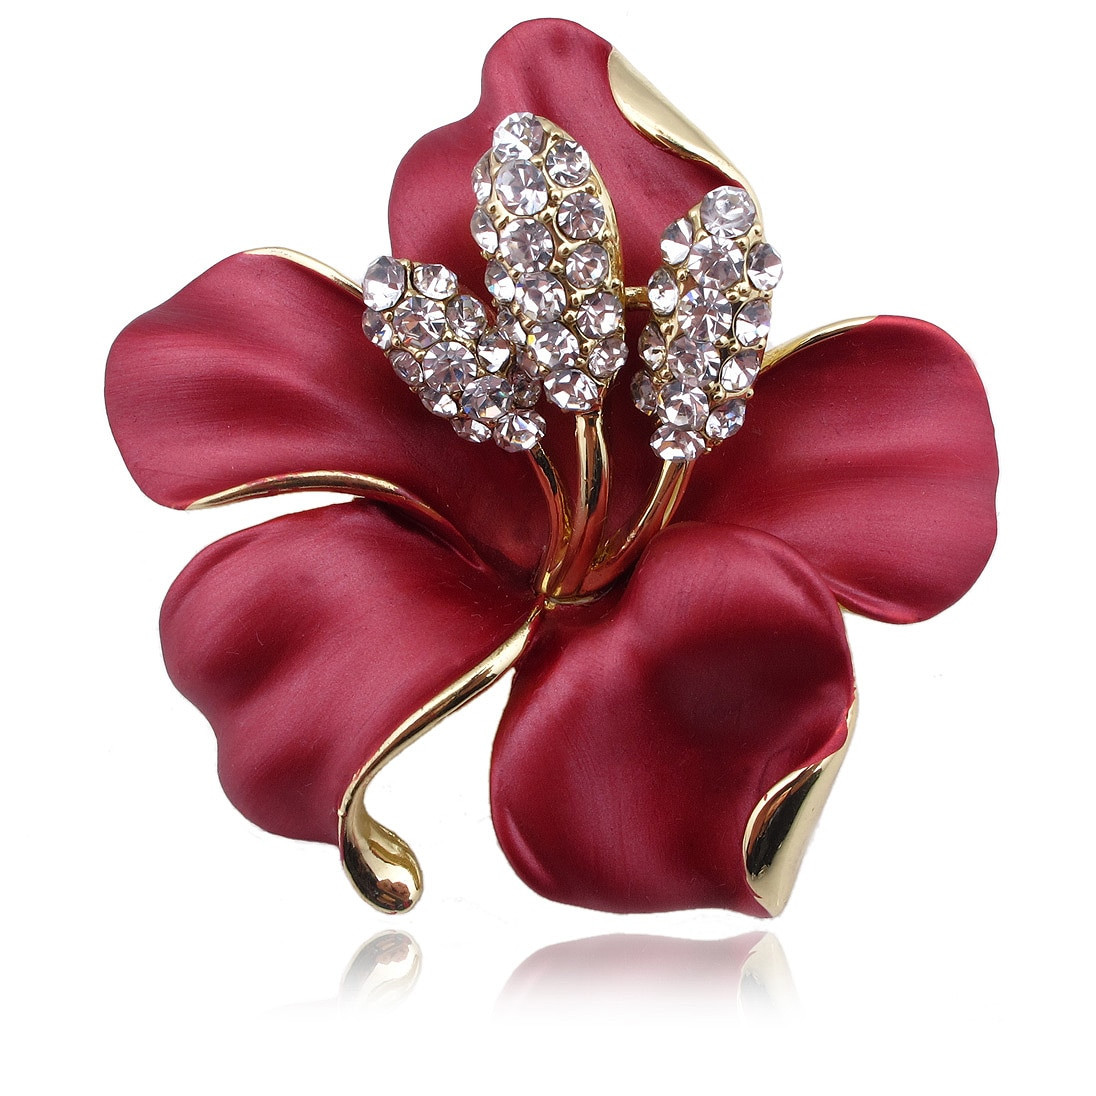 Pins Jewelry 2016 Hot Enamel Brooch Crystal Lily Flower Brooches